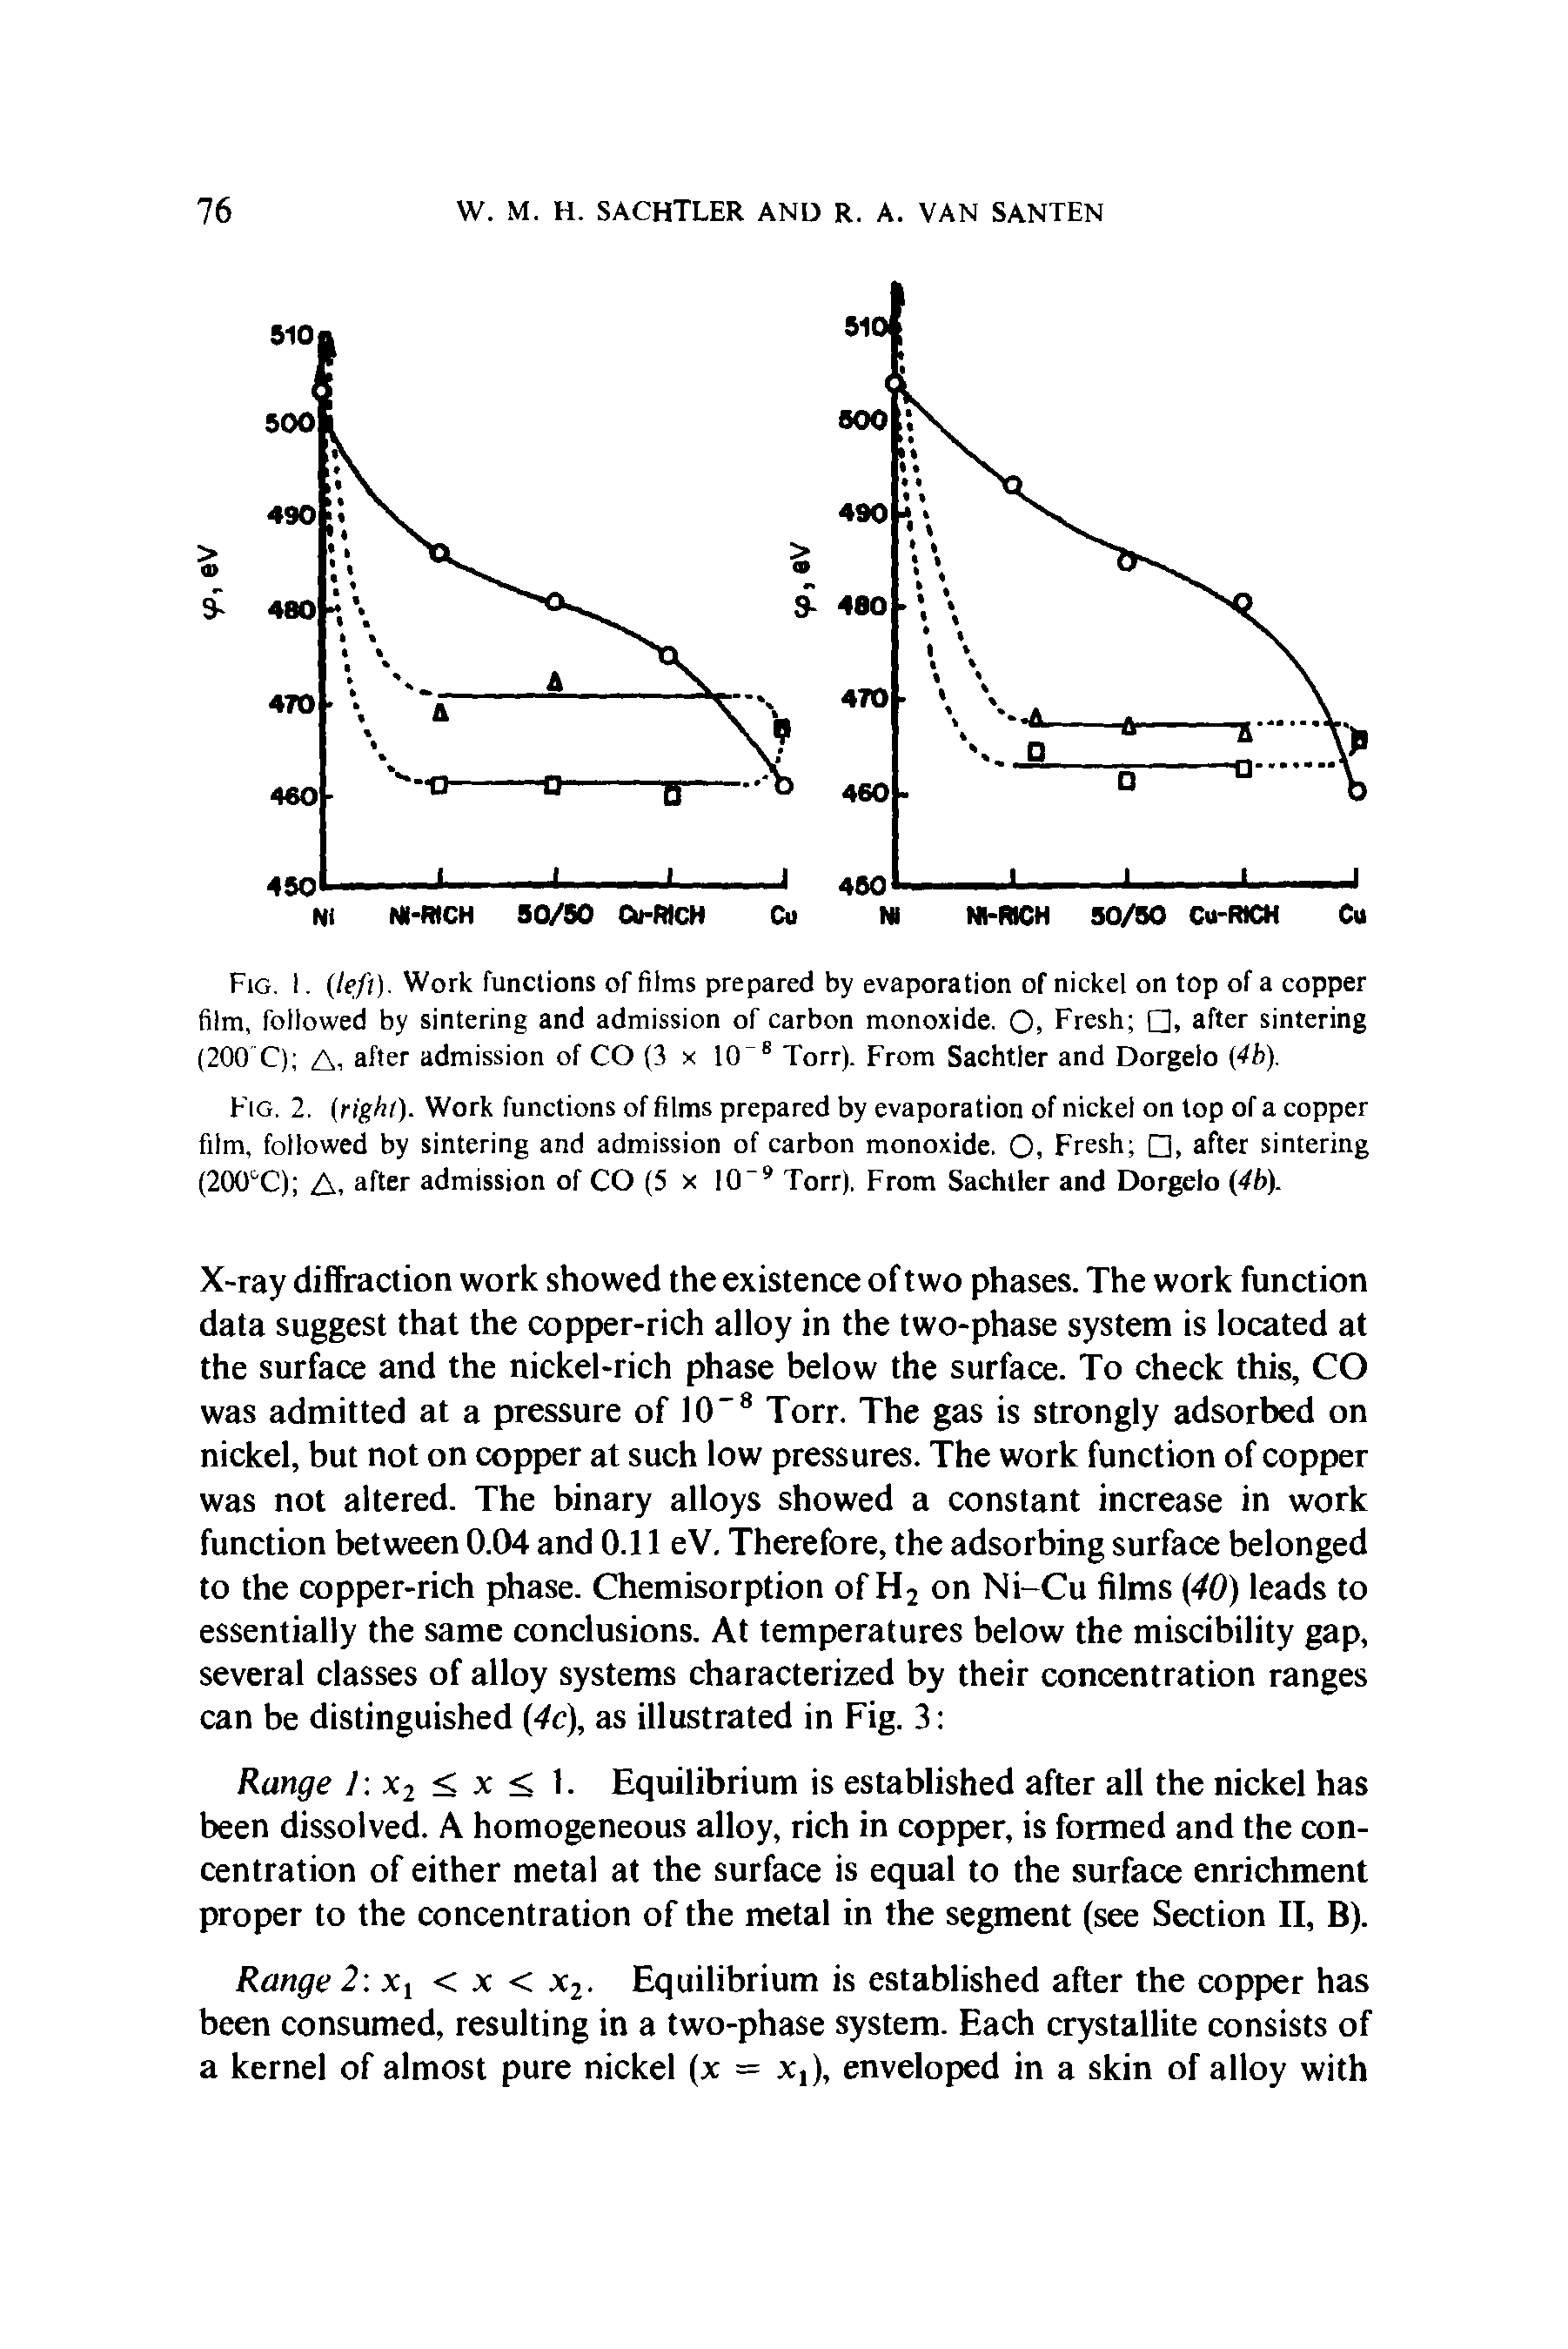 Fig. I. (left). Work functions of films prepared by evaporation of nickel on top of a copper film, followed by sintering and admission of carbon monoxide. O, Fresh , after sintering (200 C) A, after admission of CO (3 x 10 8 Torr). From Sachtler and Dorgelo (4b).